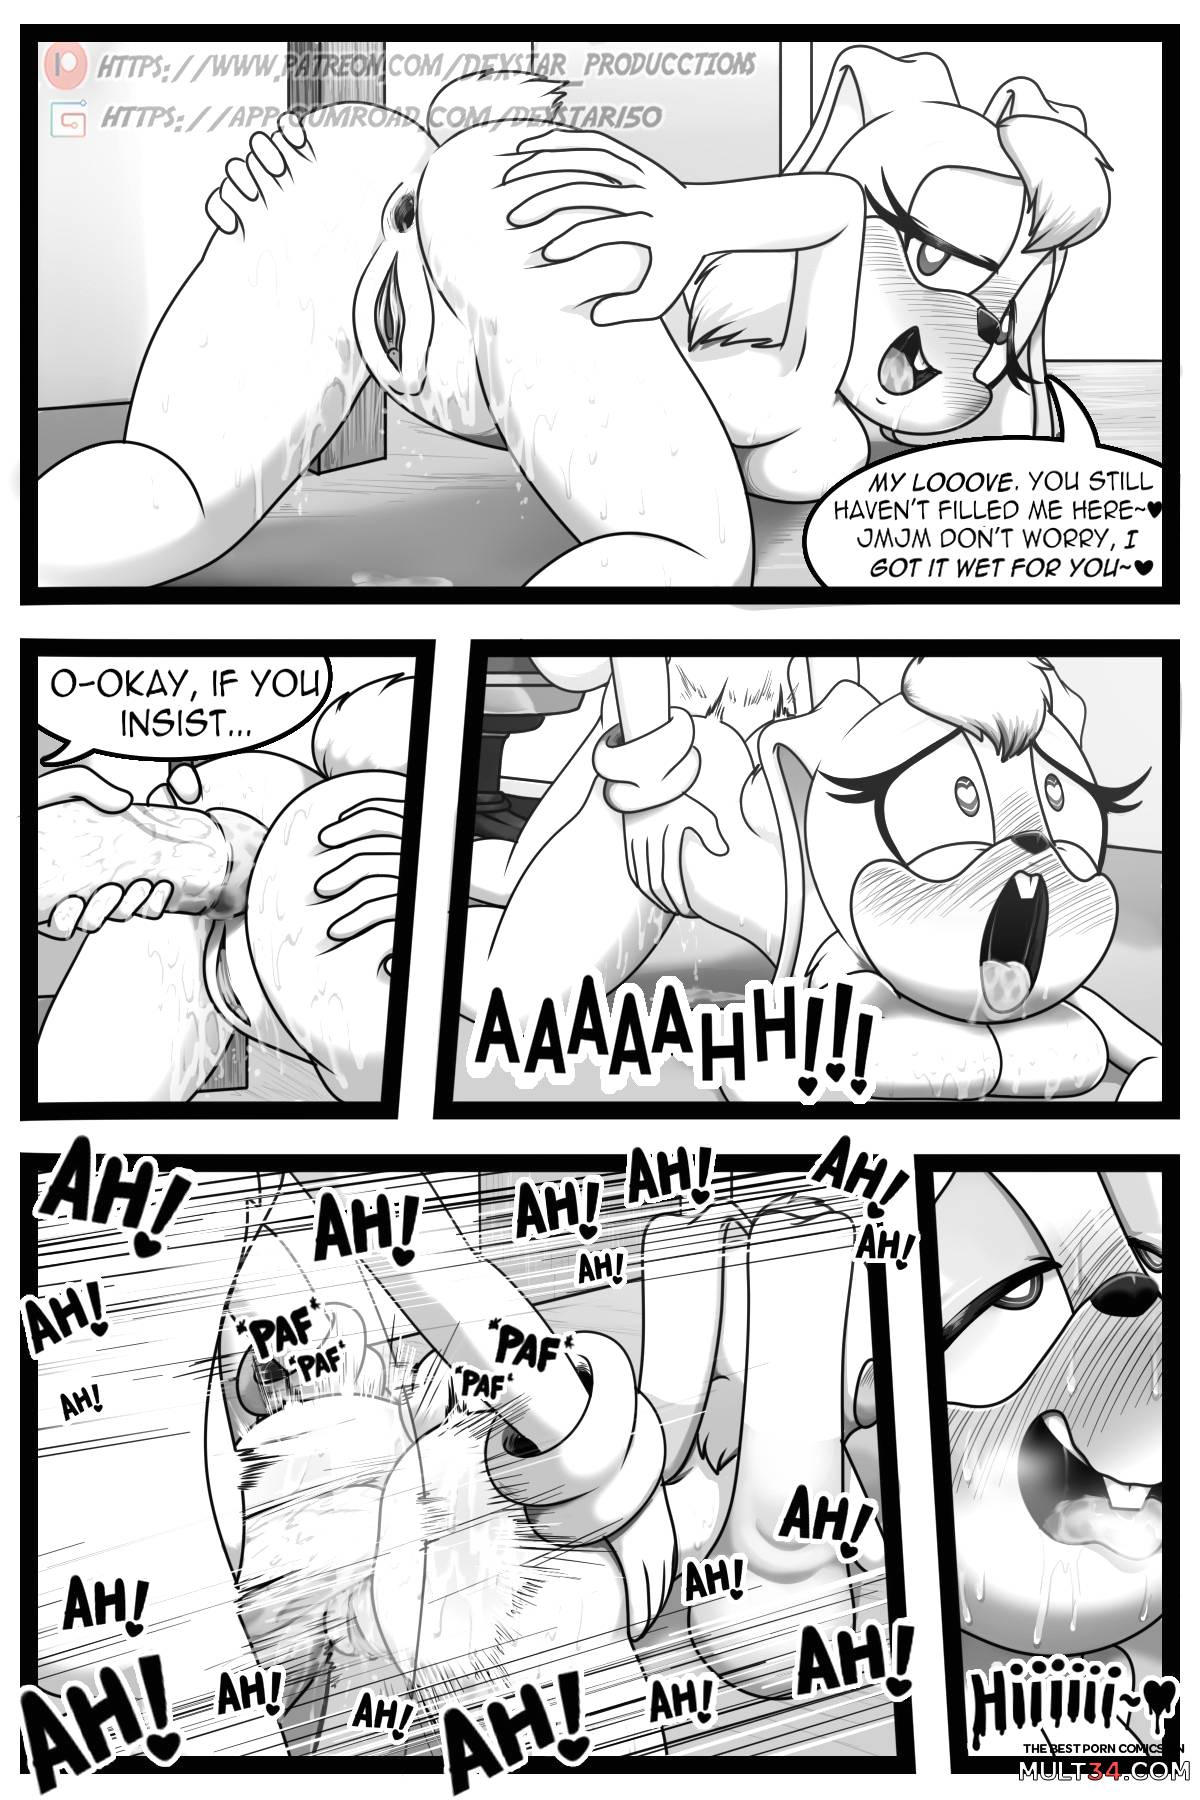 Please Fuck Me: Cream x Tail - Extra Story! page 39